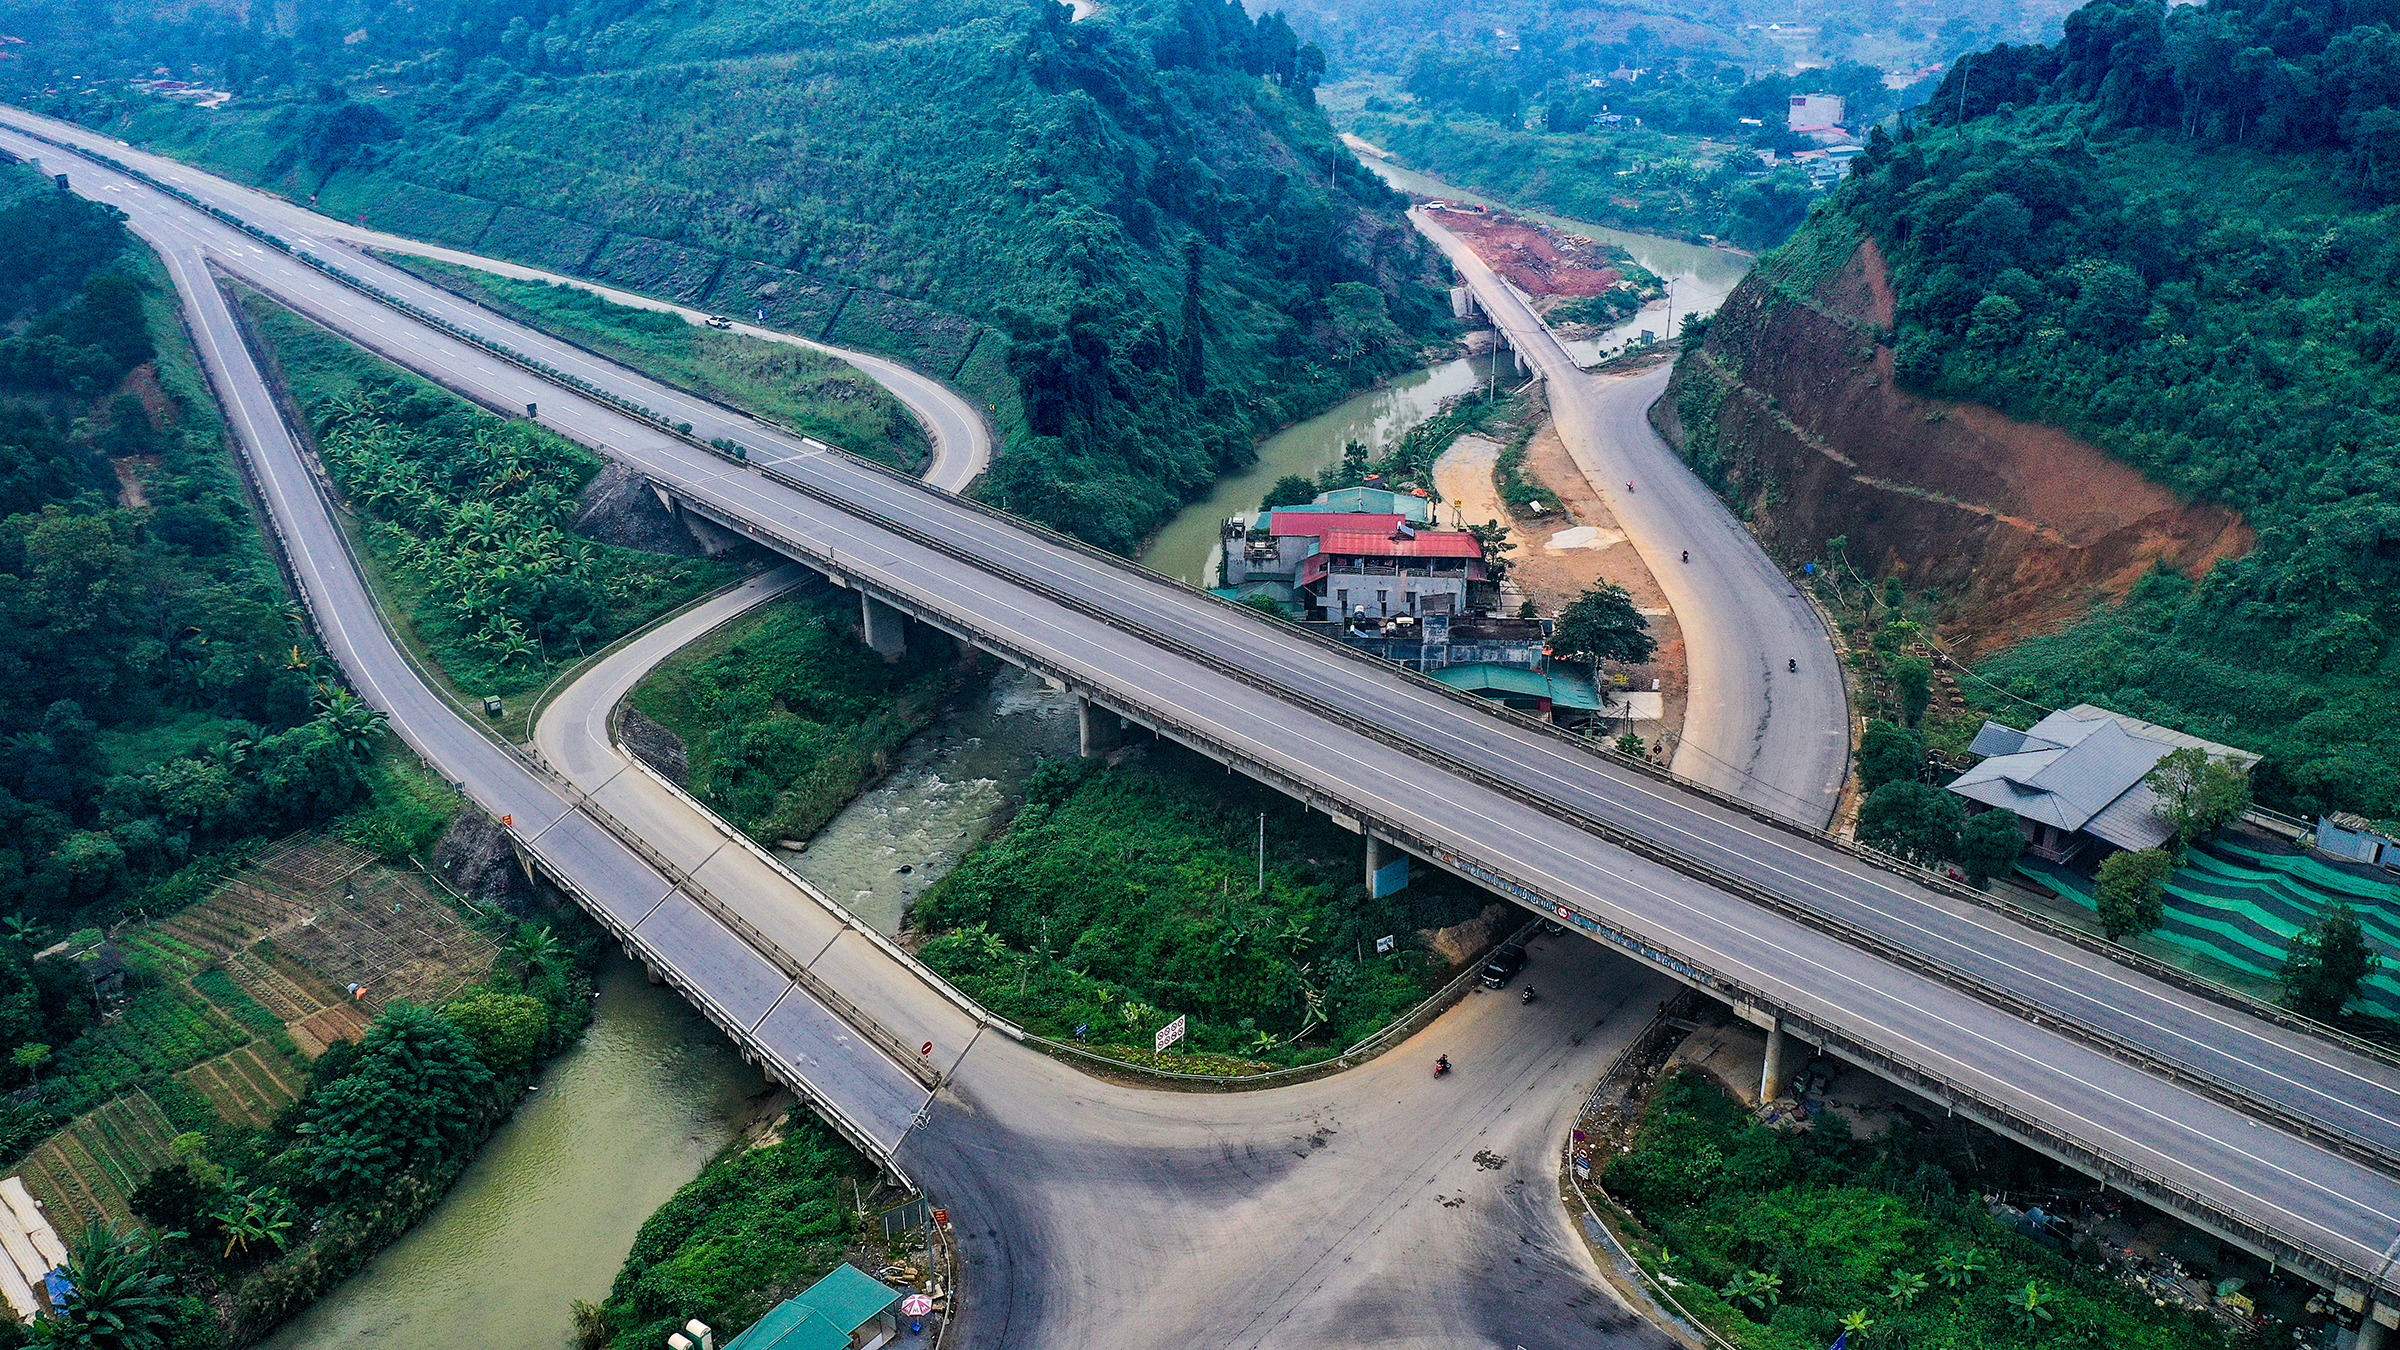 A part of the Noi Bai - Lao Cai Expressway that connects Hanoi with Lao Cai Province, November 2021. Photo by VnExpress/Giang Huy